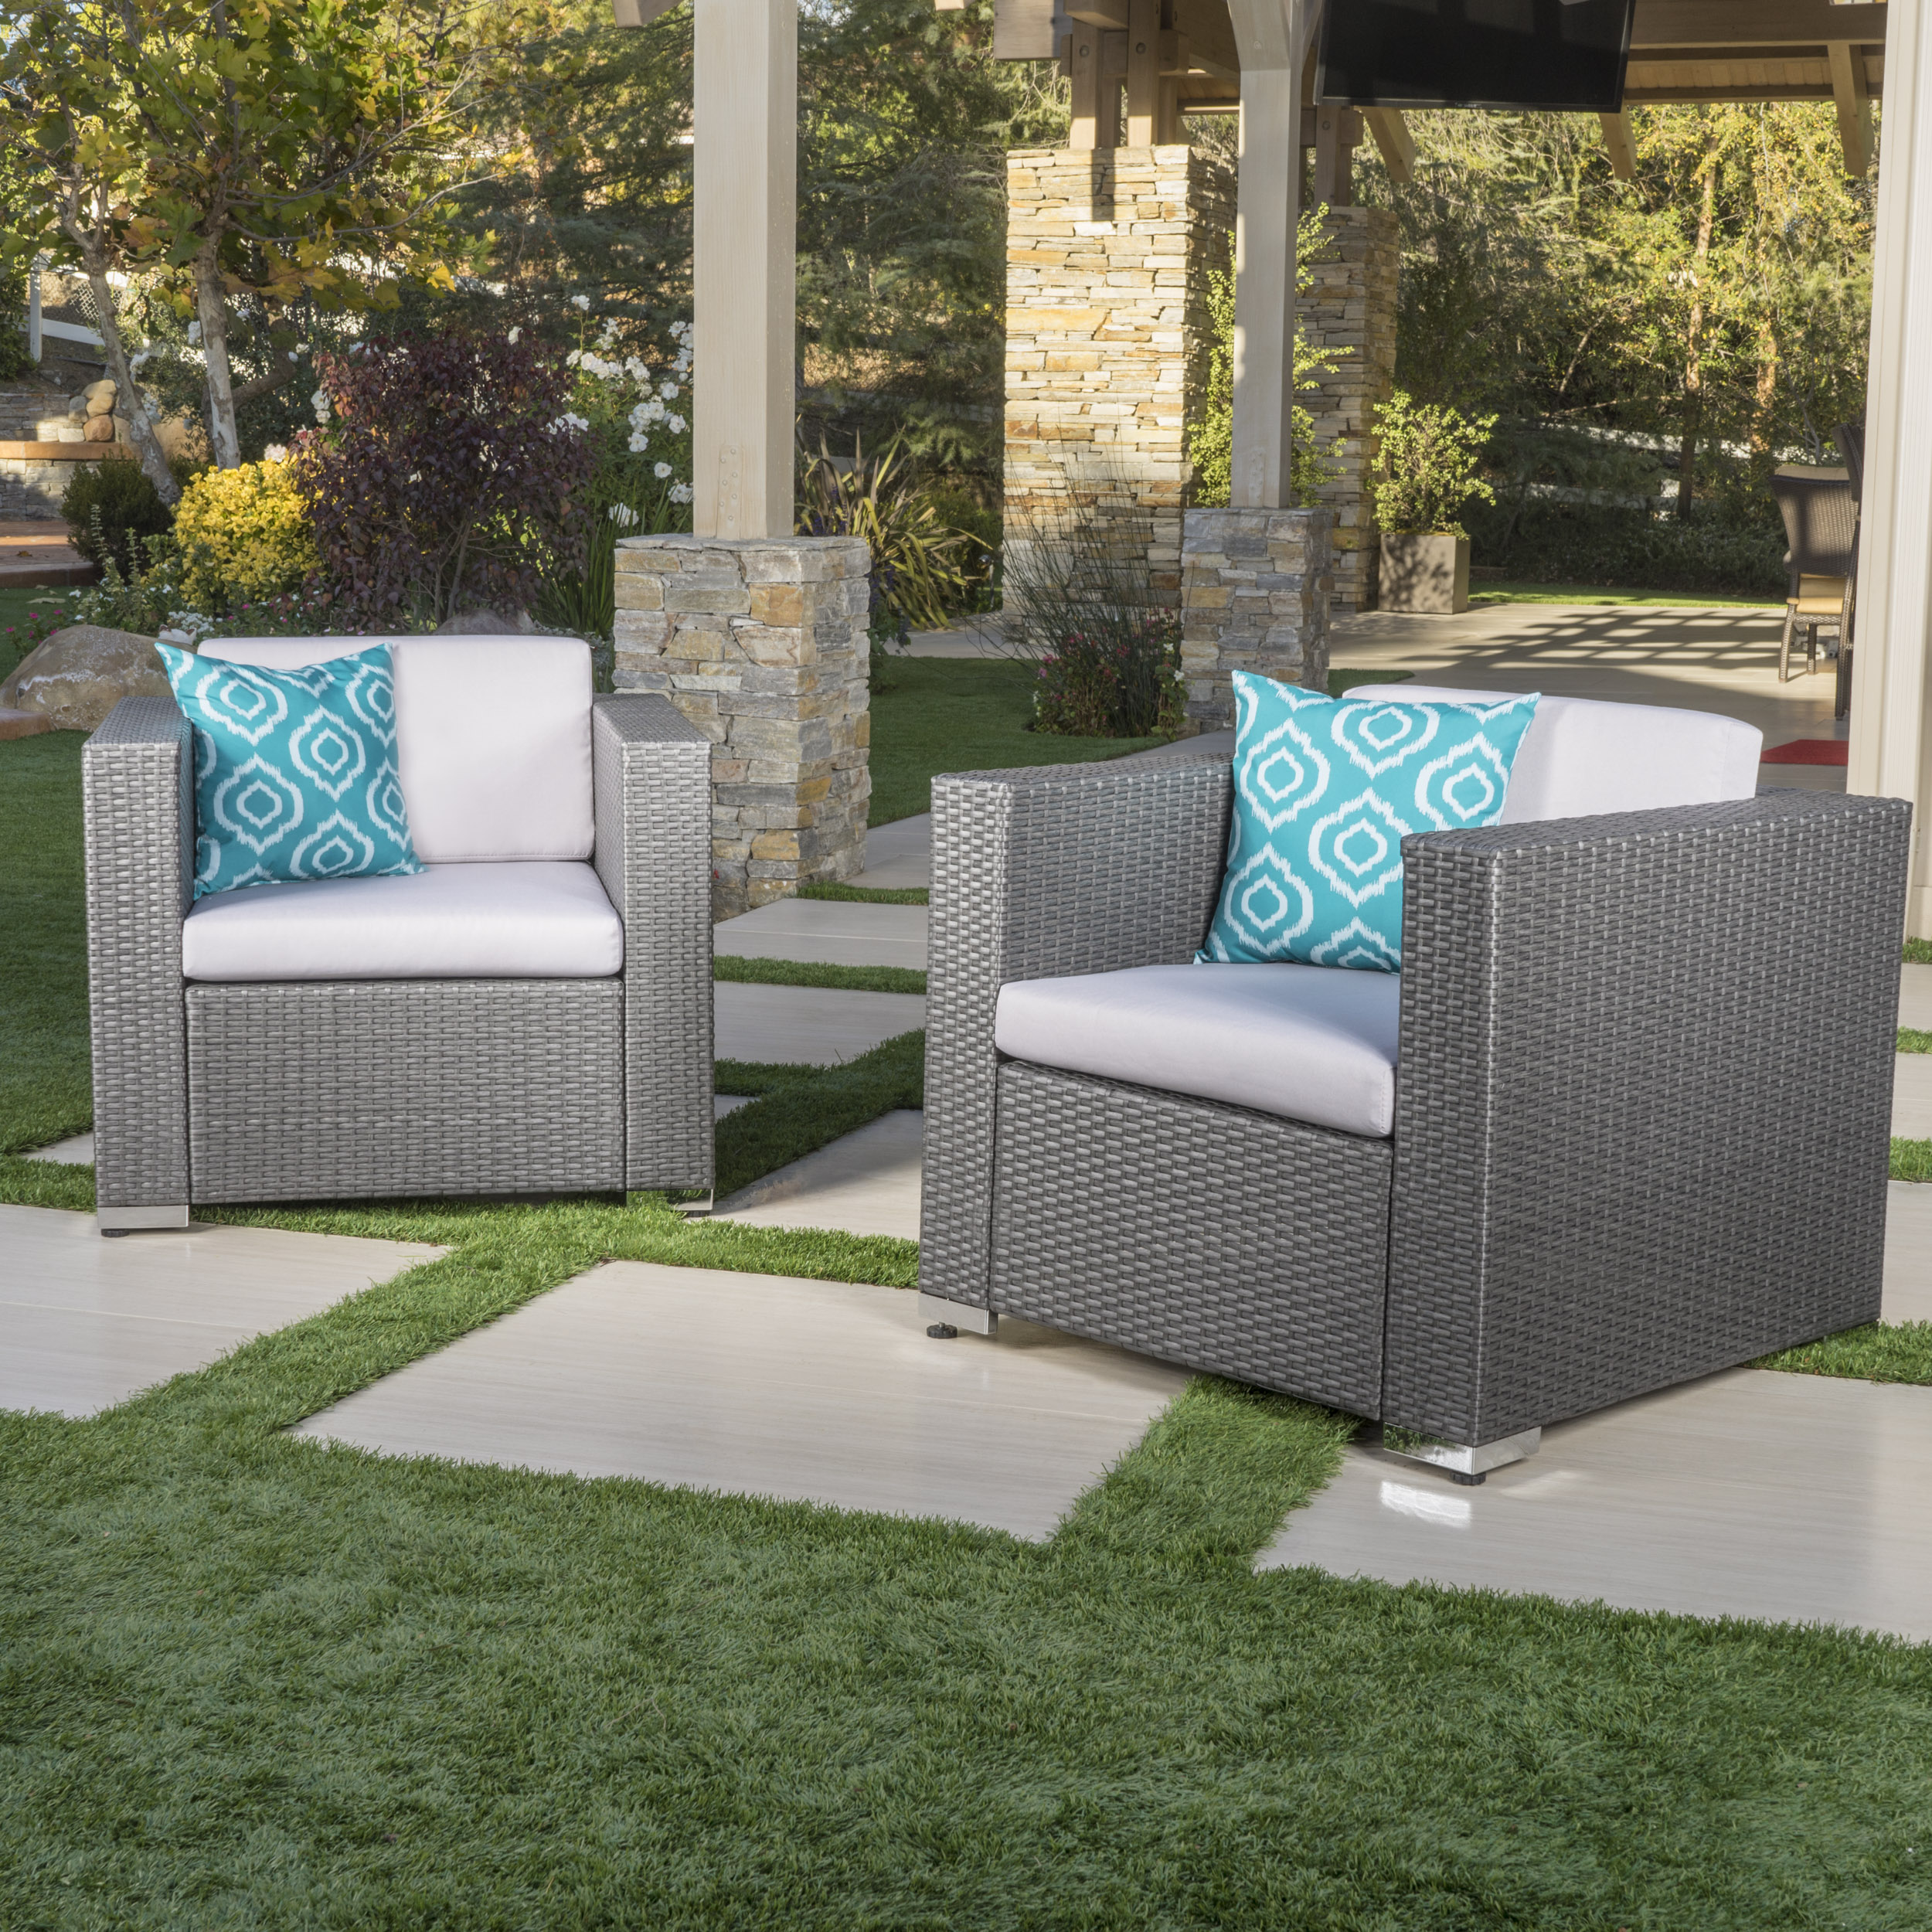 Verin Outdoor Wicker Club Chair with Water Resistant Fabric Cushions, Set of 2, Grey/ Silver - image 2 of 9